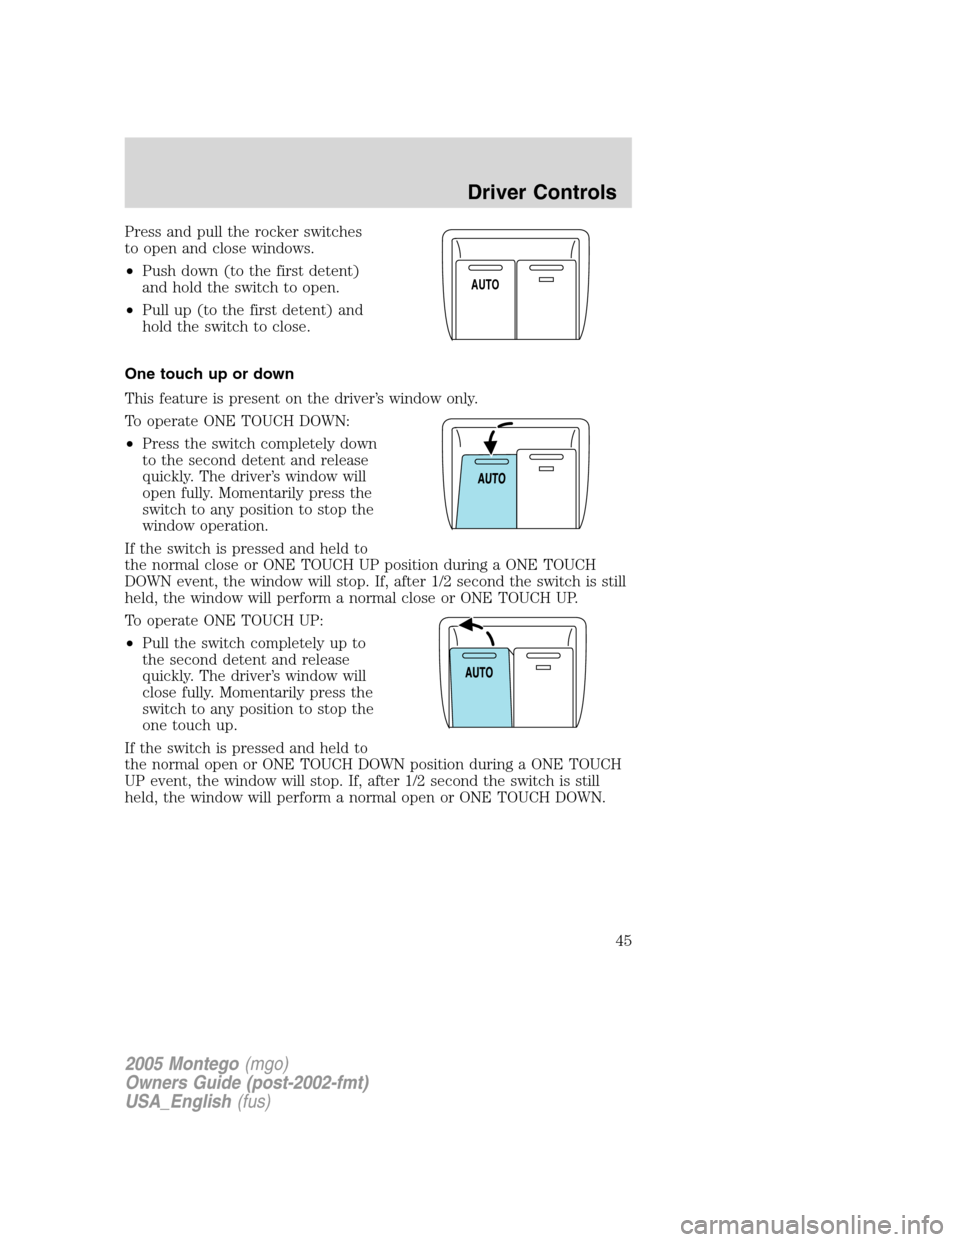 Mercury Montego 2005  s Service Manual Press and pull the rocker switches
to open and close windows.
•Push down (to the first detent)
and hold the switch to open.
•Pull up (to the first detent) and
hold the switch to close.
One touch u